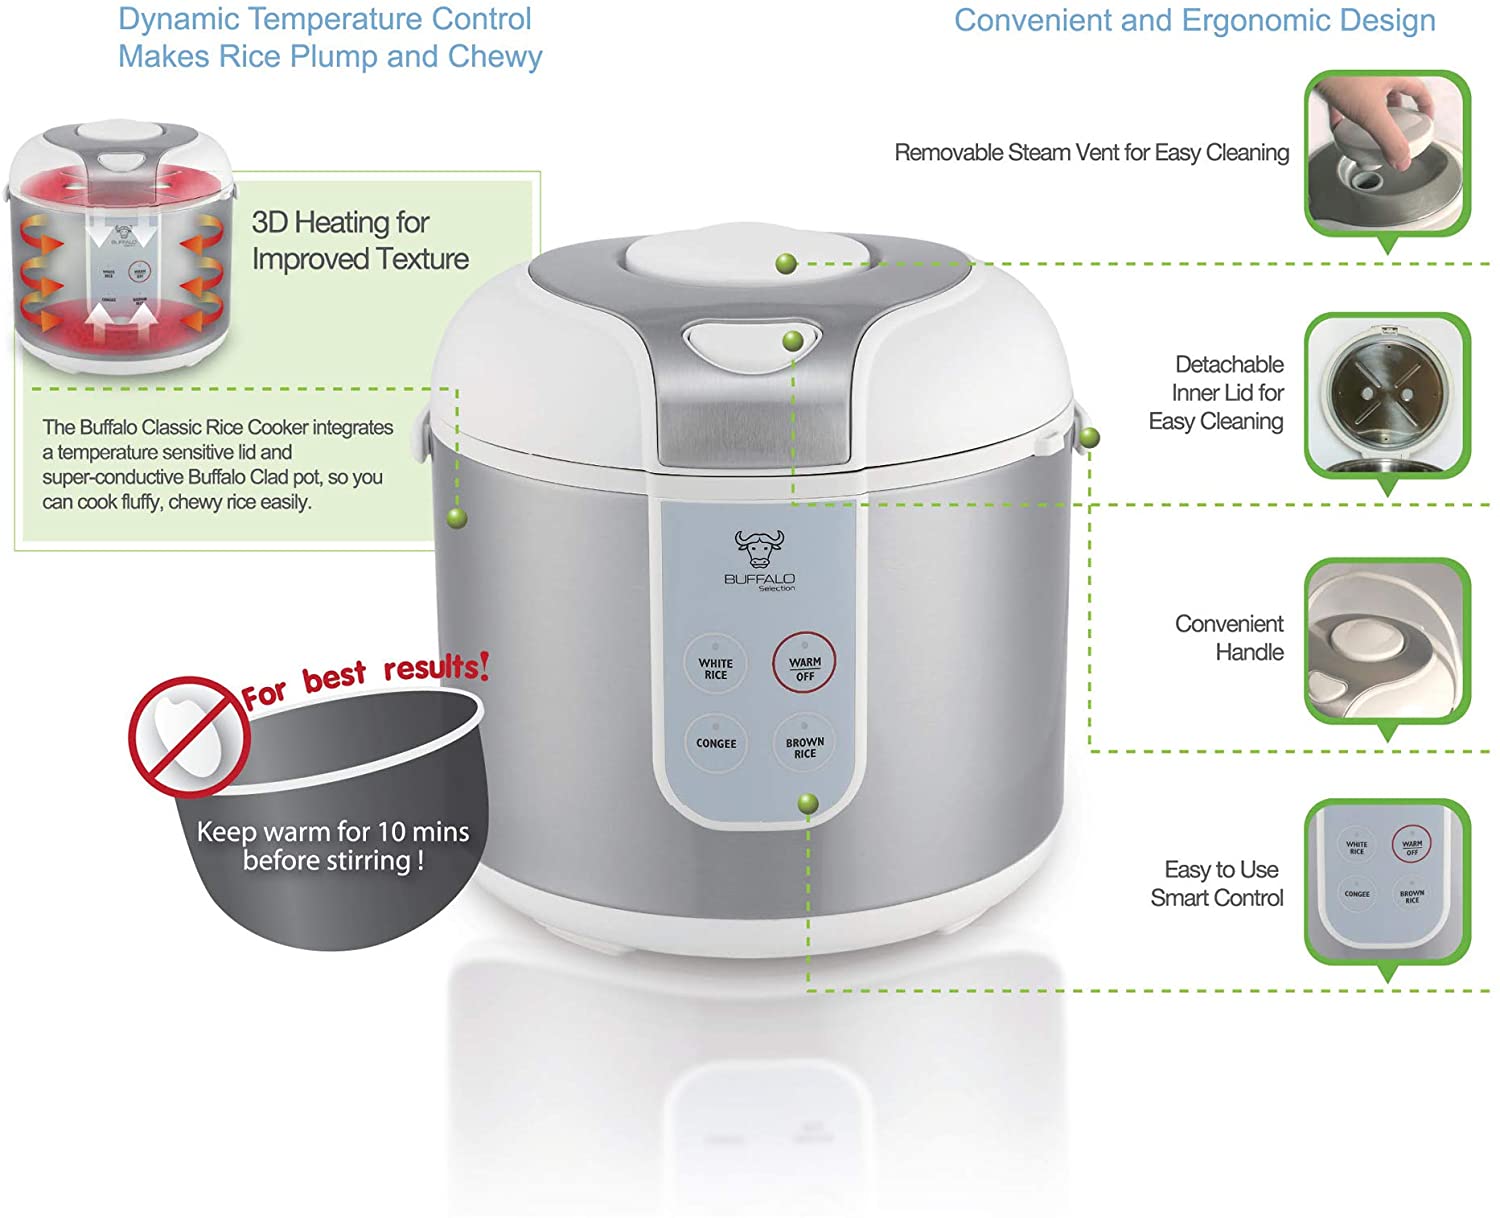 New Buffalo Rice Cooker model with upgraded features